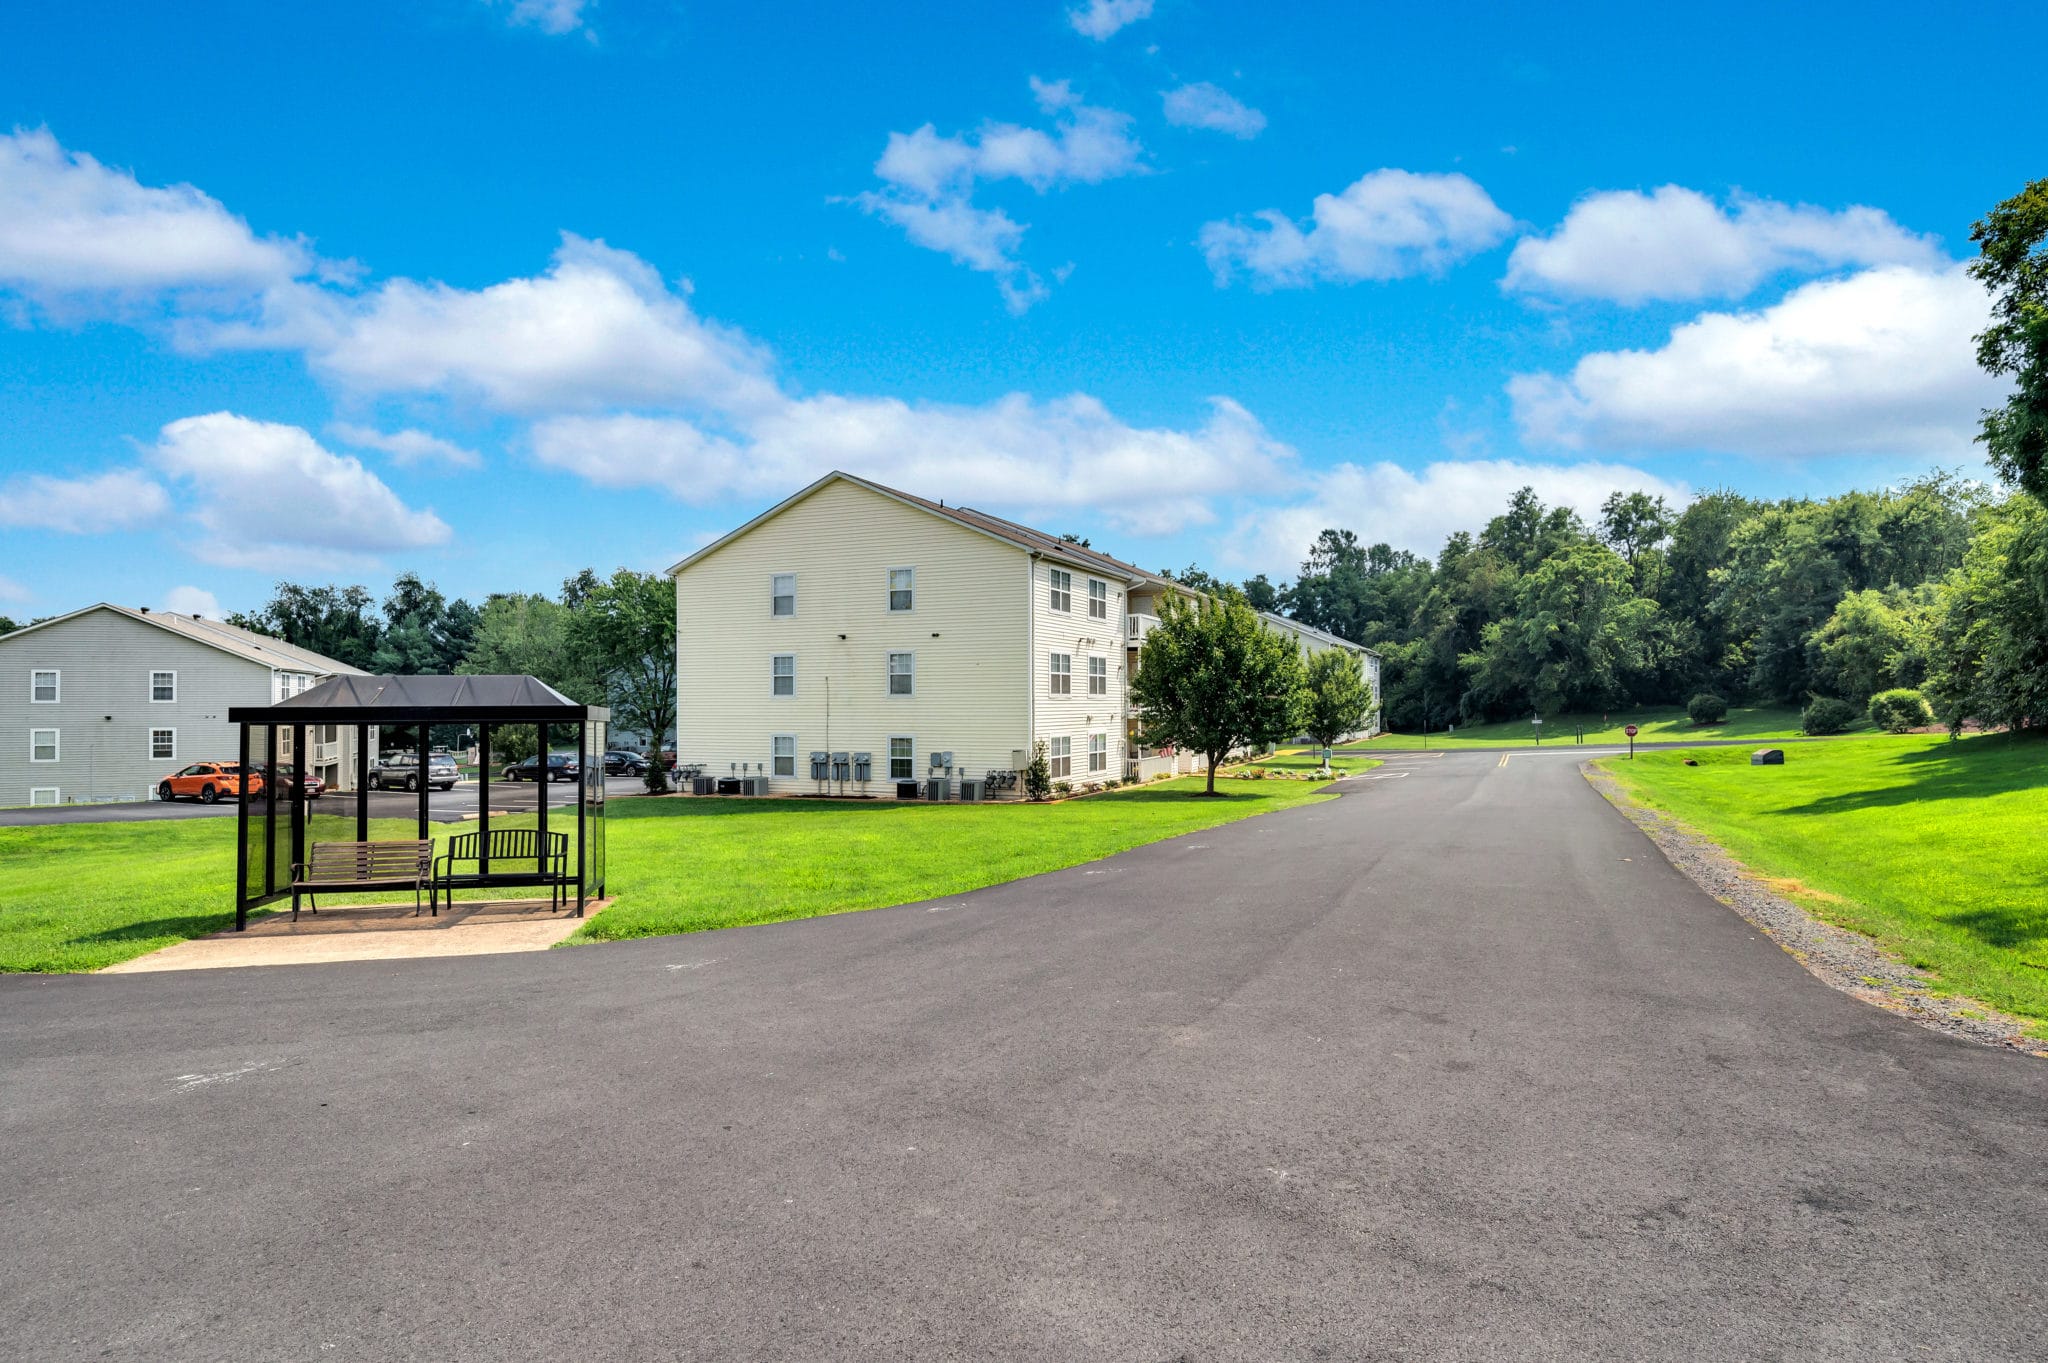 apartment exterior and bus stop | Spark Culpeper apartments